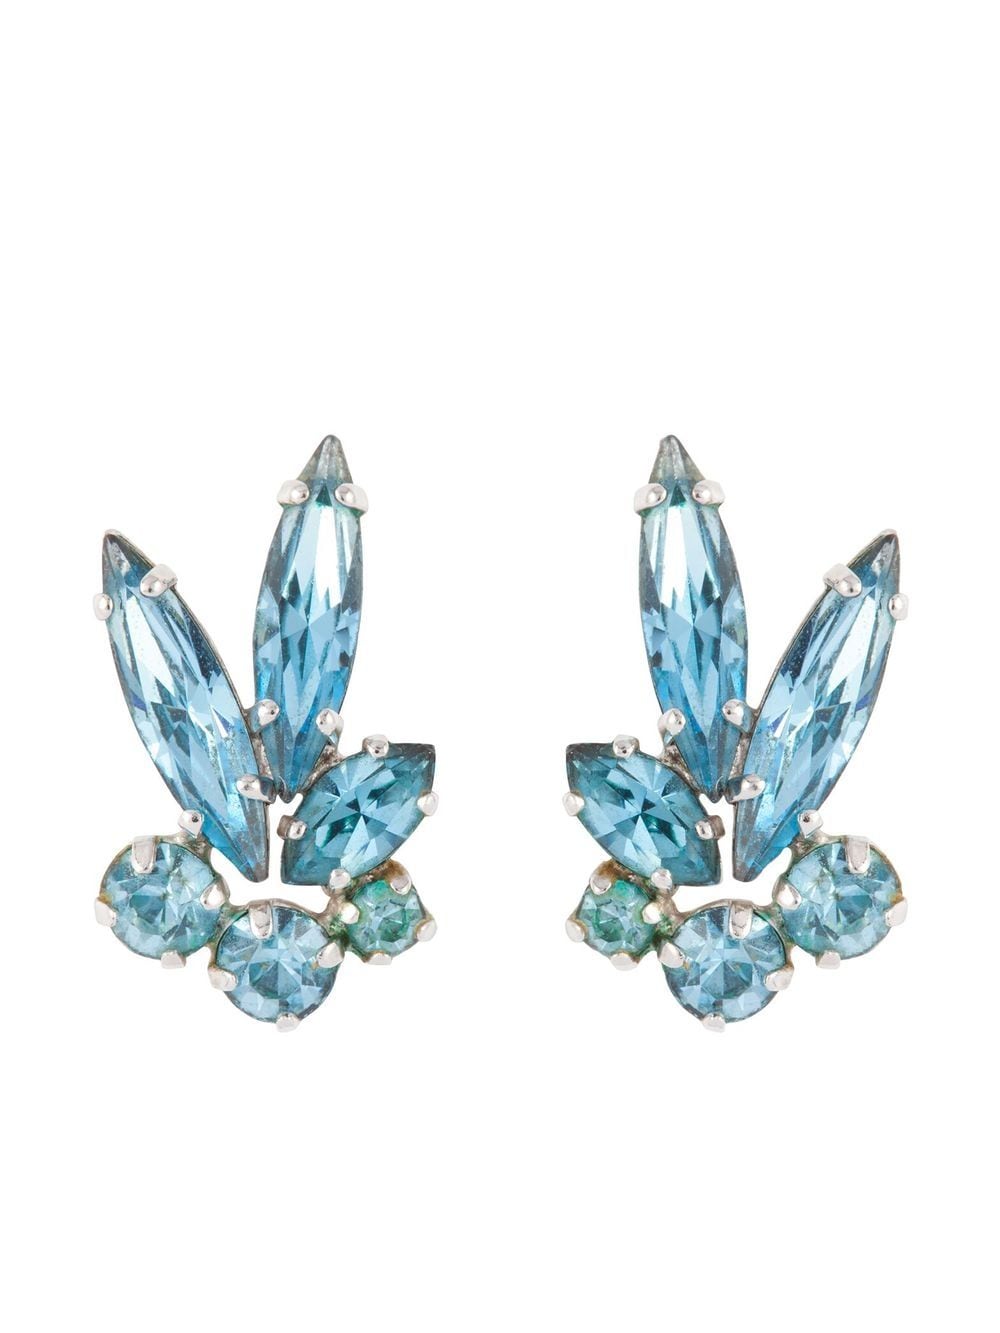 1950s crystal-embellished clip-on earrings